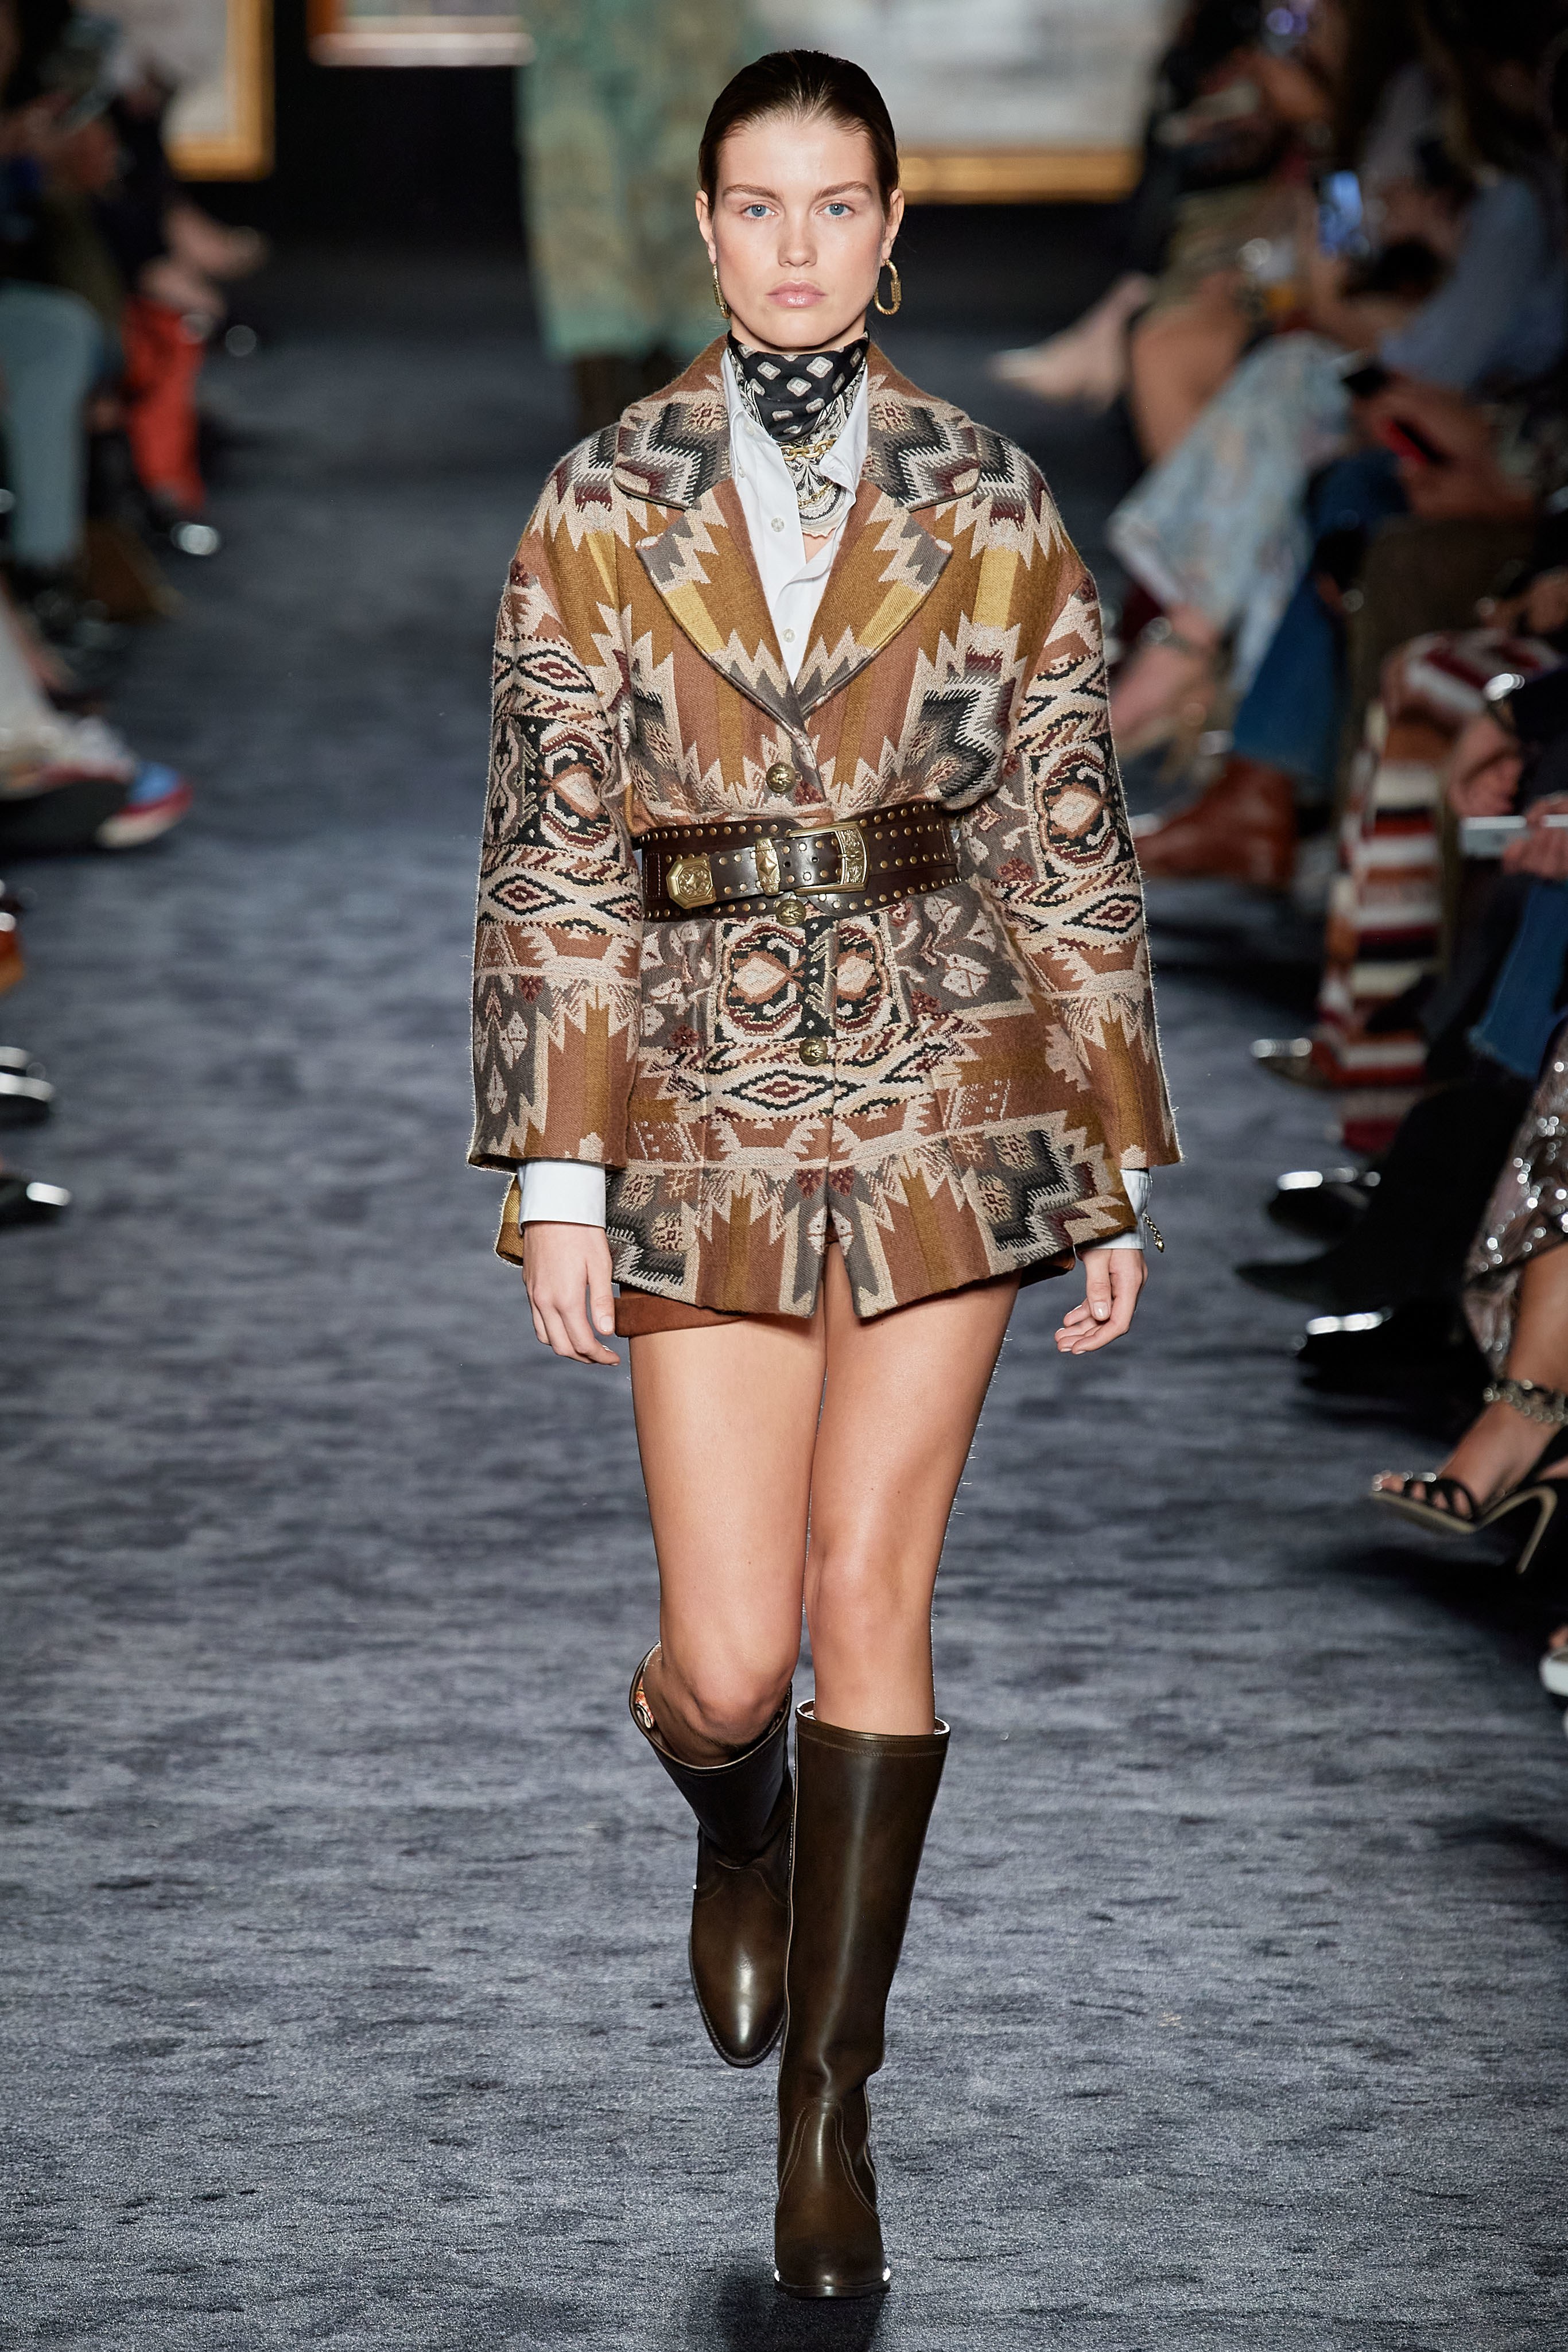 MFW FW 2020 Photos: The Best Designs From The Runways